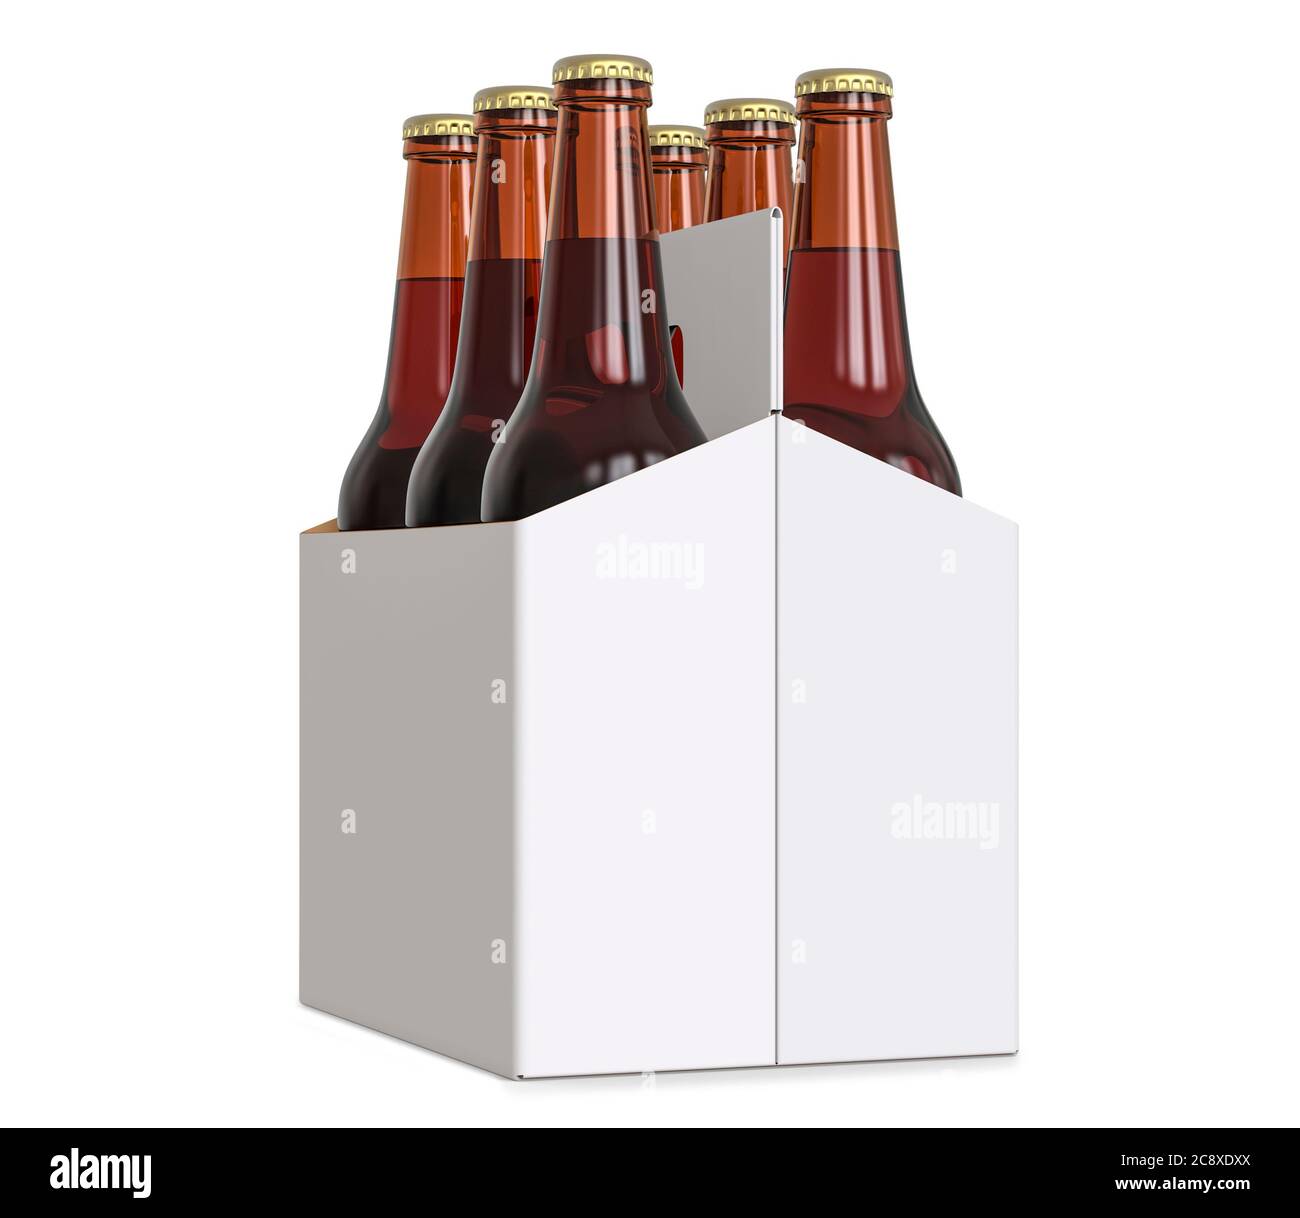 Six-pack cardboard carrier bottles of beer. 3D render, isolated on white background Stock Photo